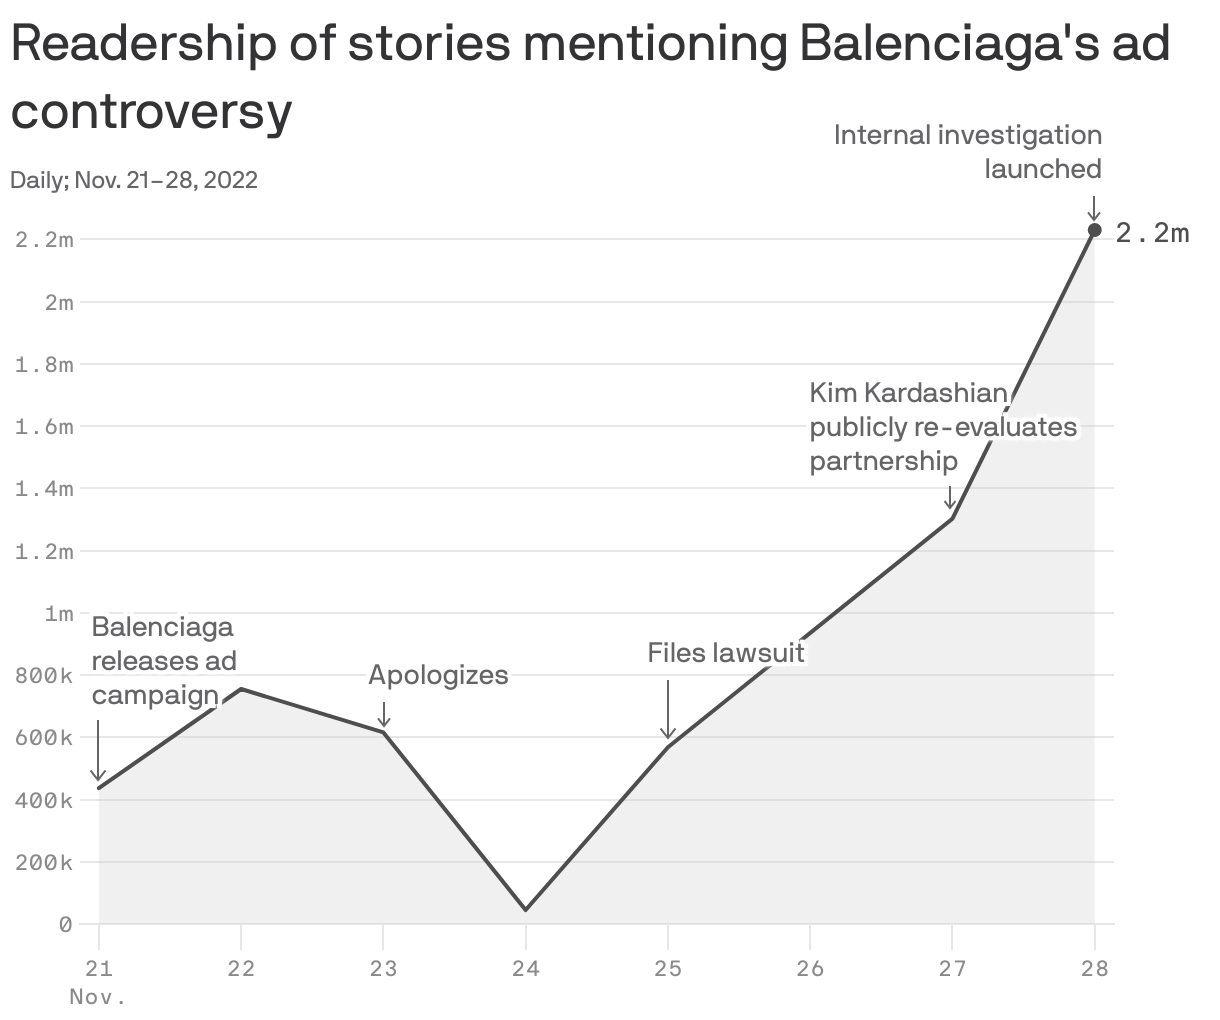 Readership of stories mentioning Balenciaga's ad controversy